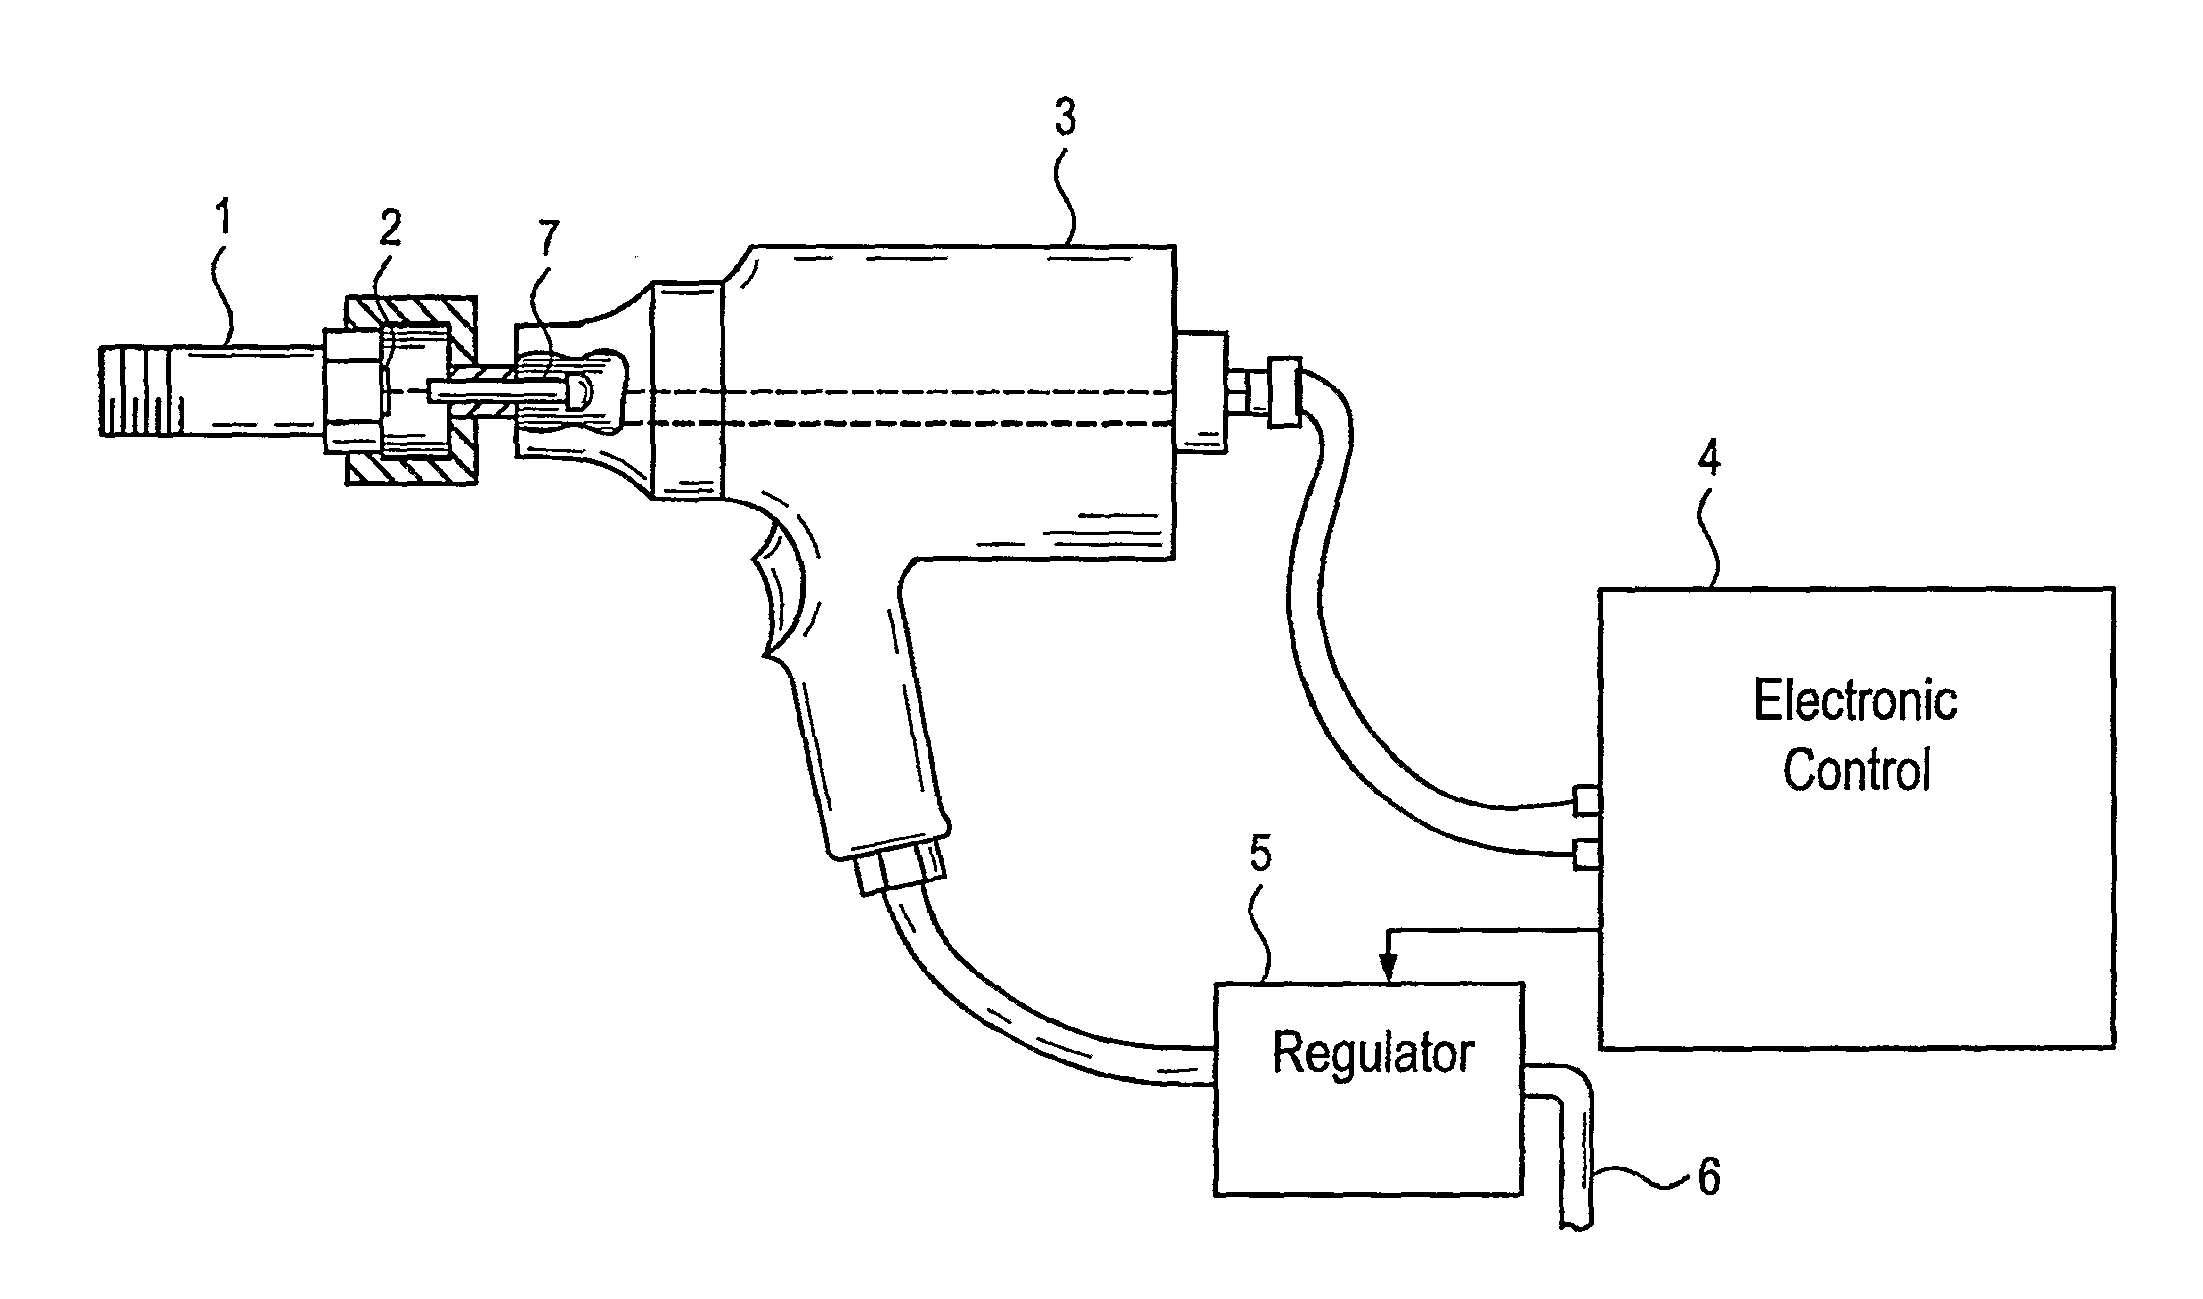 System for Dynamically Controlling the Torque Output of a Pneumatic Tool